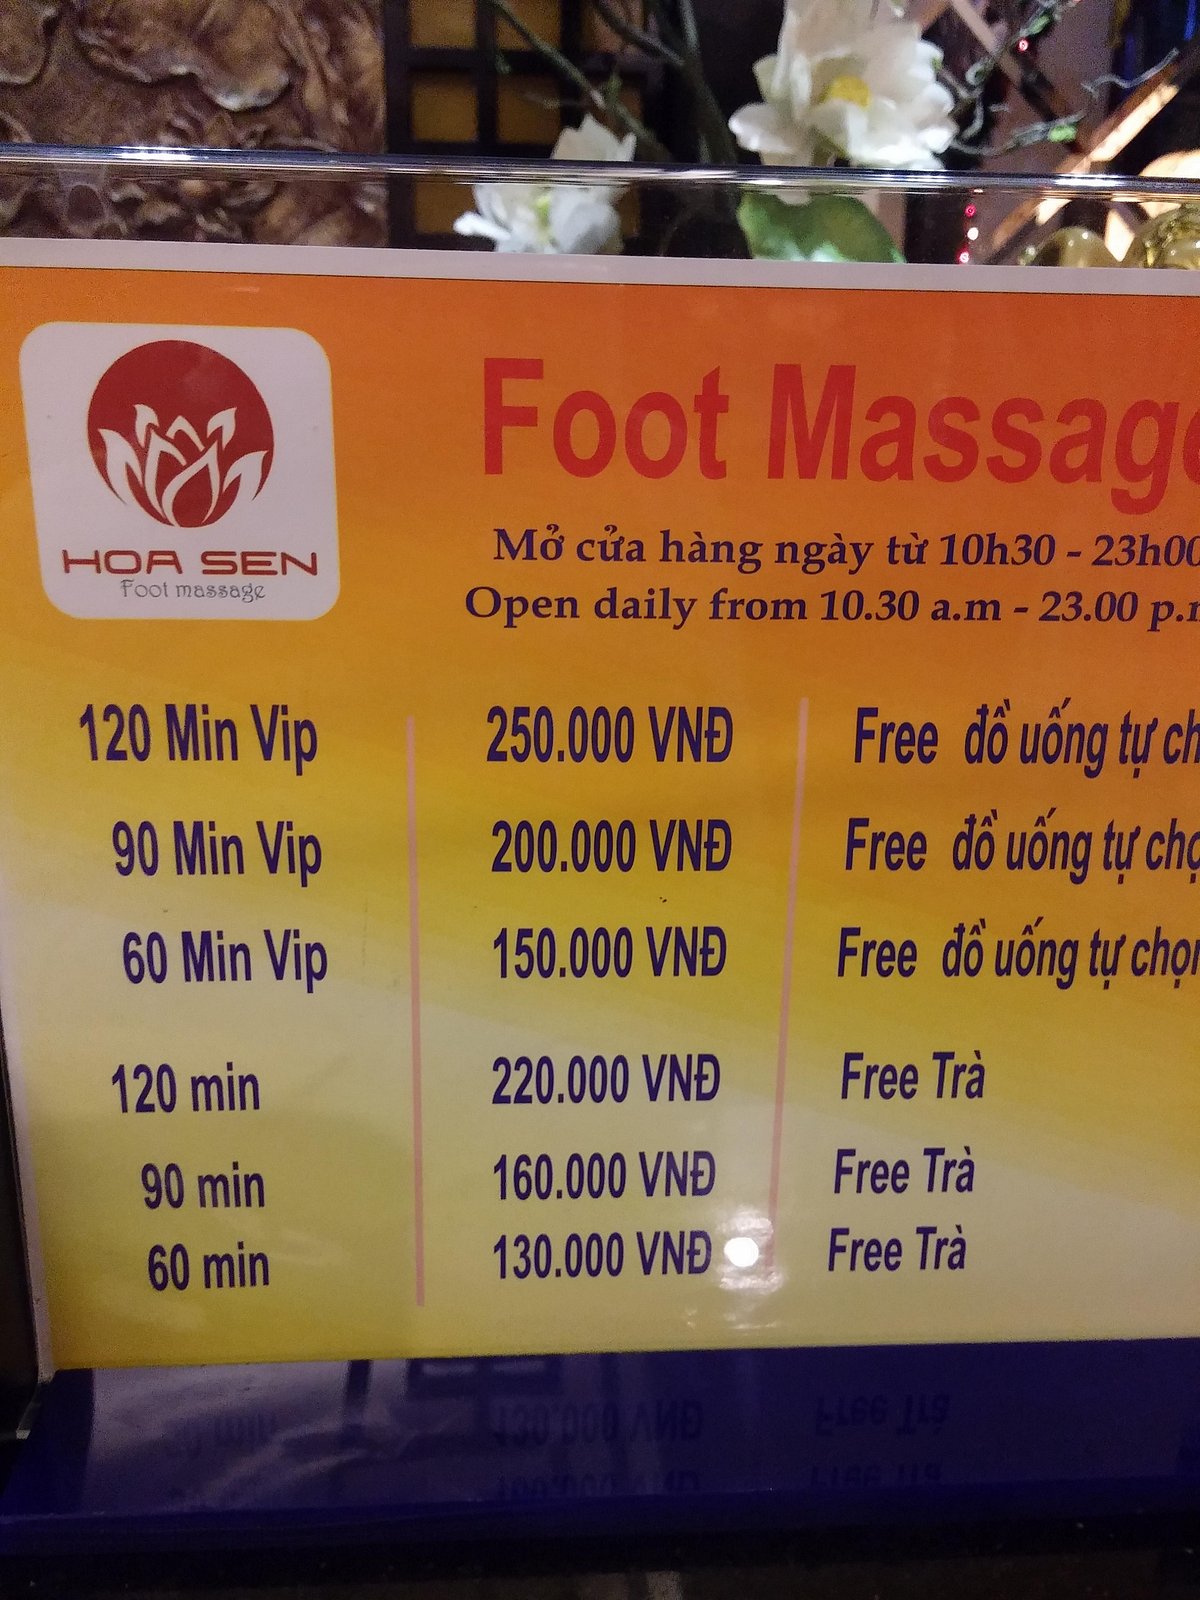 Hoa Sen Foot Massage Hanoi All You Need To Know Before You Go